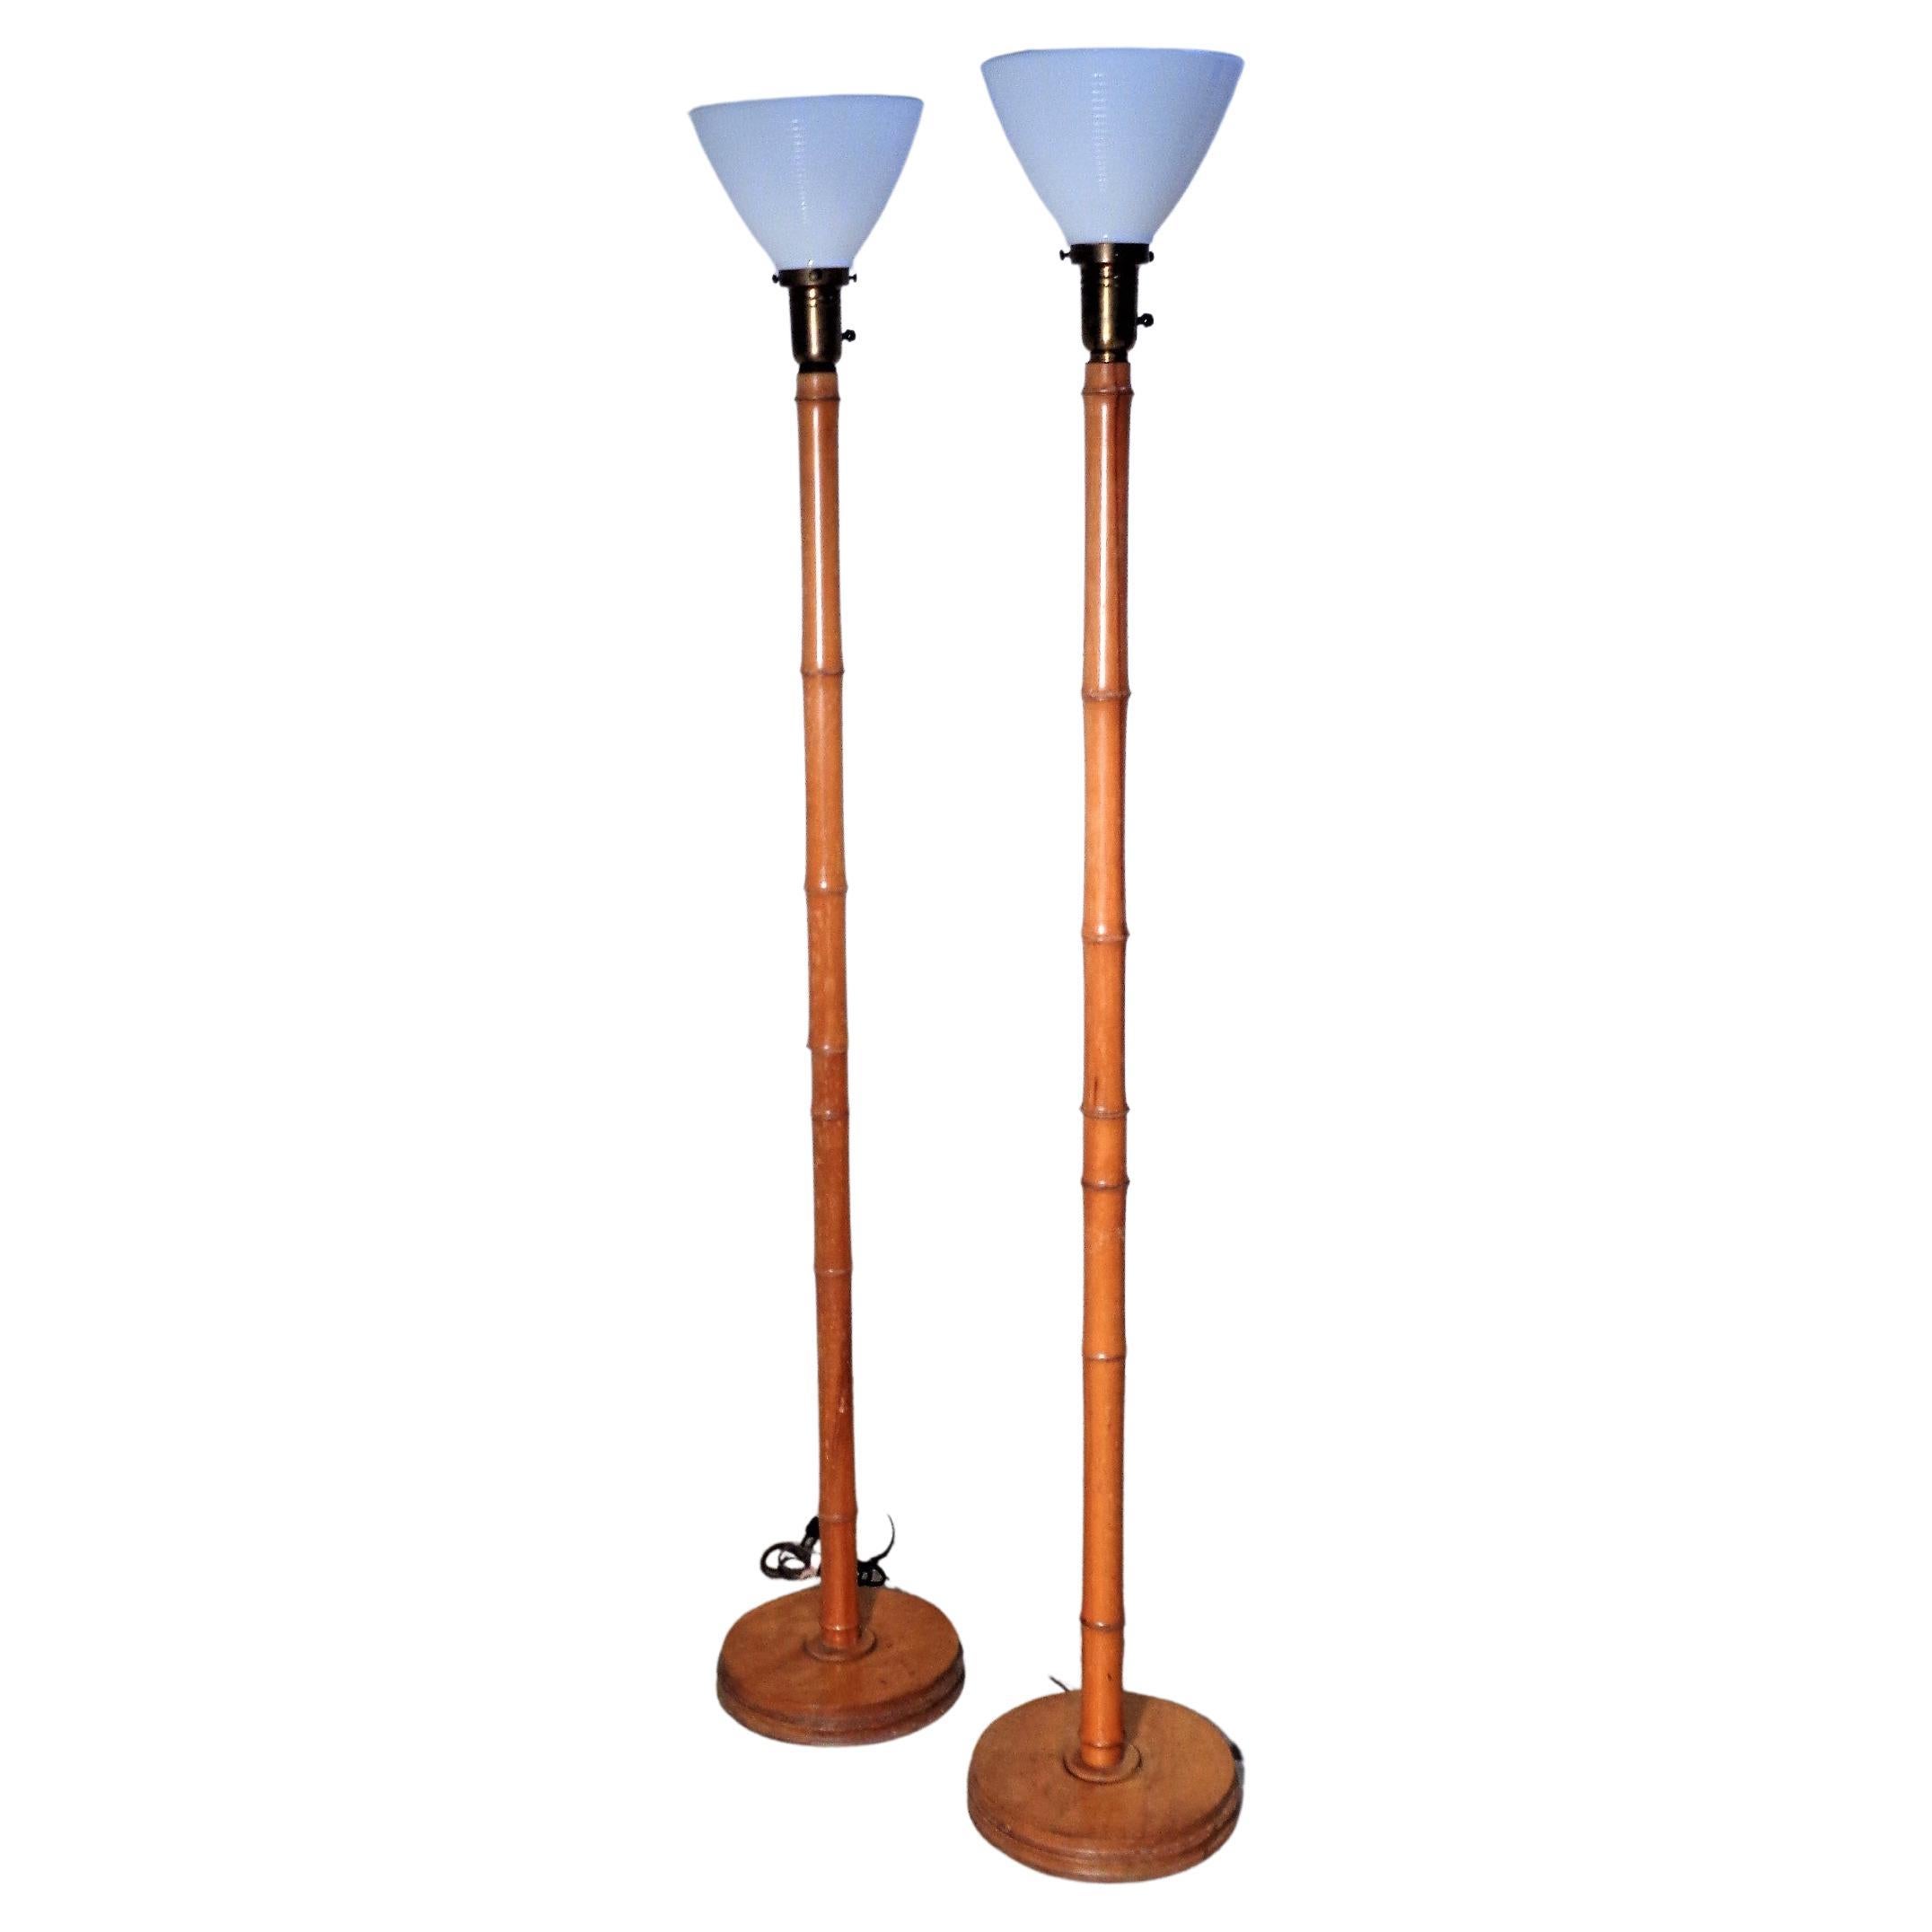 A pair of faux bamboo wood floor lamps in beautifully aged original honey colored surface w/ brass metal sockets and milk glass inserts. circa 1940s. Look at all pictures and read condition report in comment section. PRICE LISTED is FOR THE PAIR of